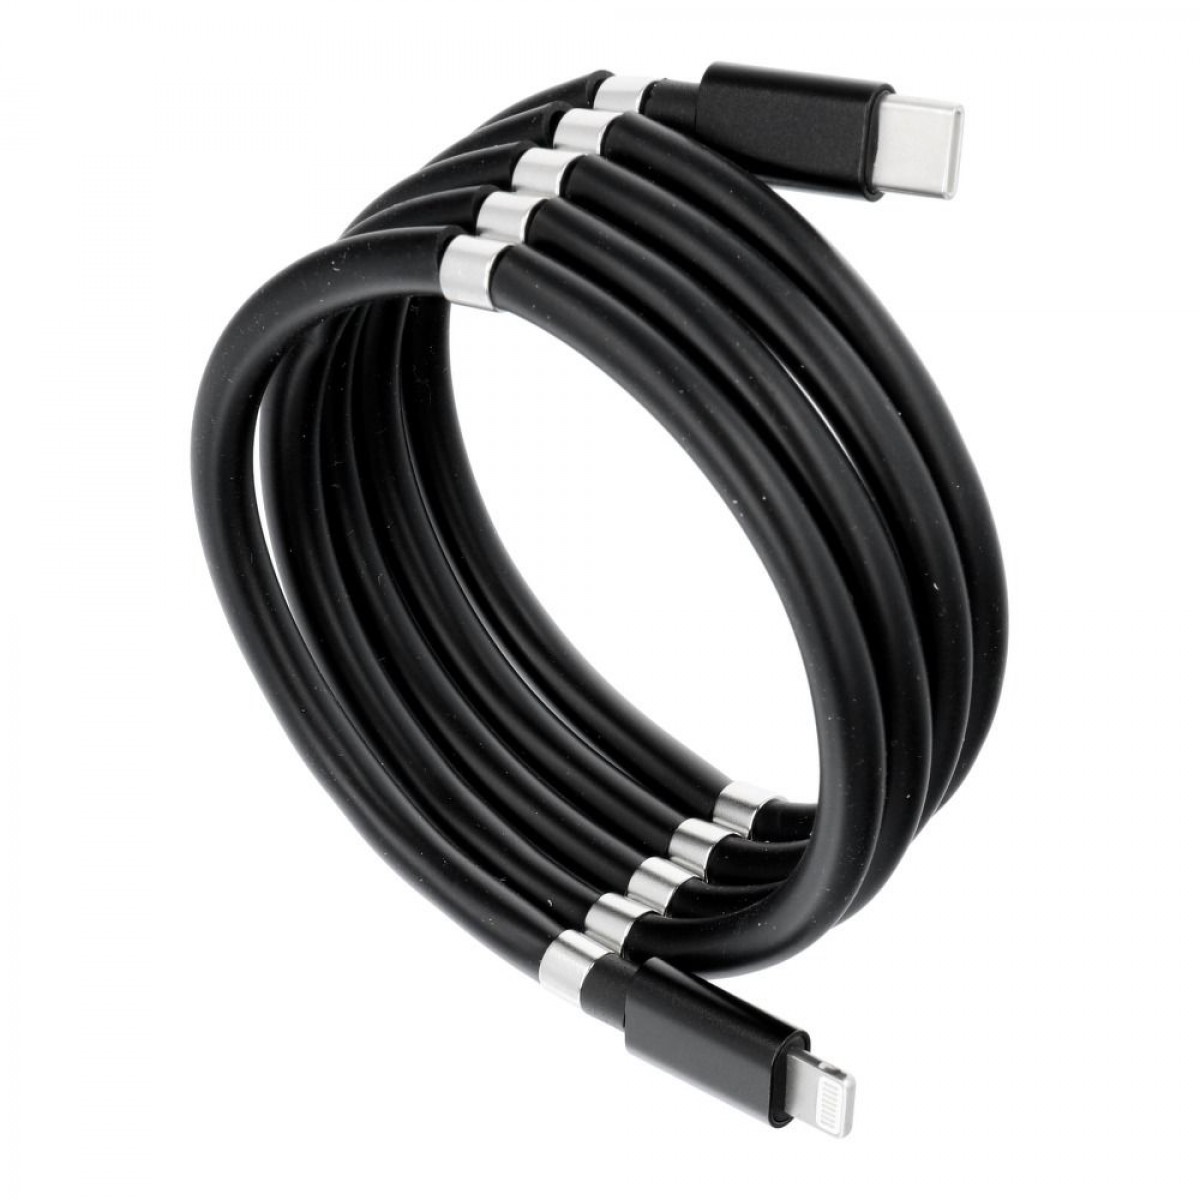 CABLE TYPE C FOR IPHONE LIGHTNING 8-PIN POWER DELIVERY PD18W MAGNETIC 3A C673 1m BLACK